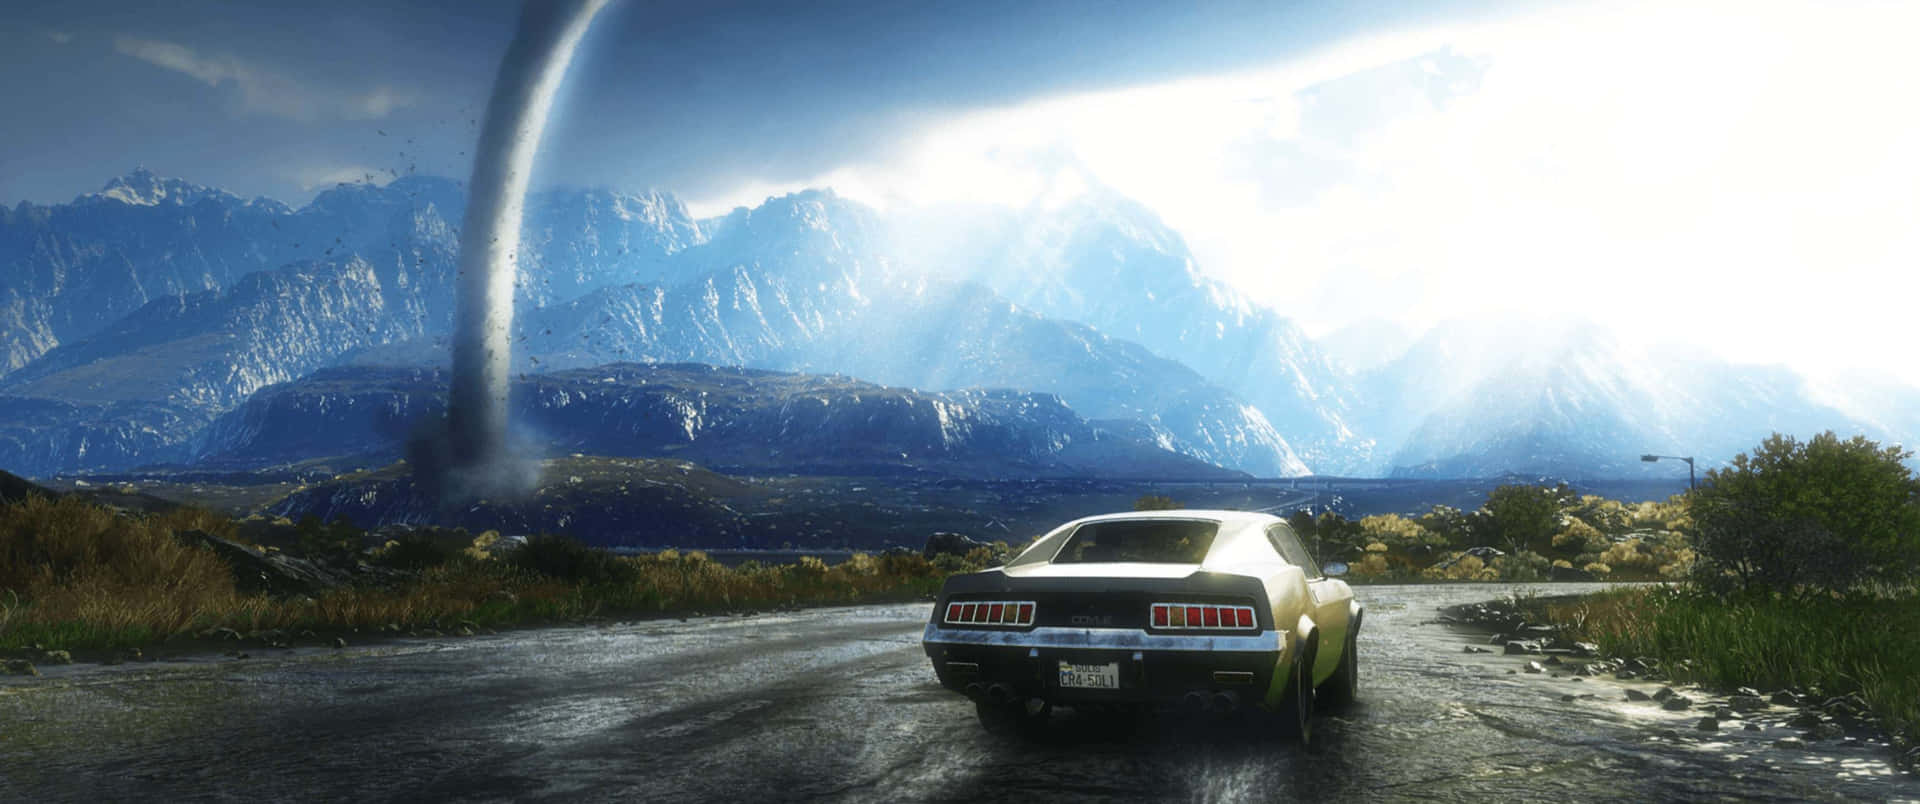 3440x1440p Just Cause 4 Vintage Car On The Road Background